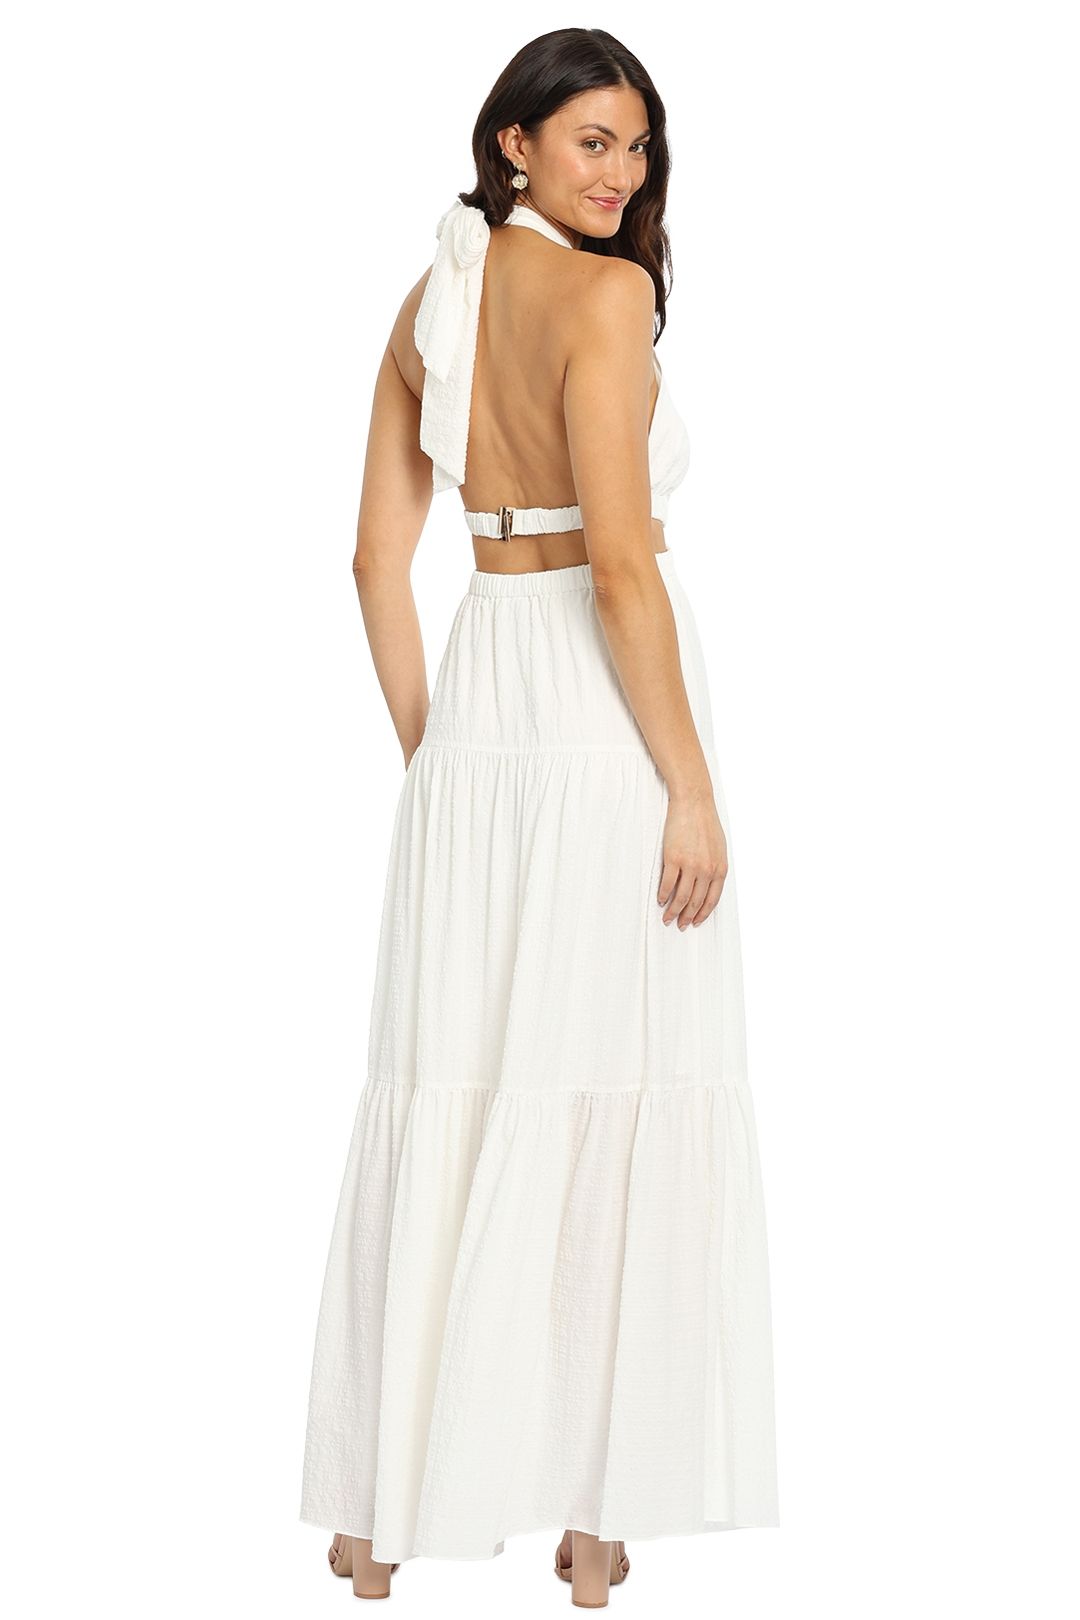 Significant Other Clementine Dress White Backless